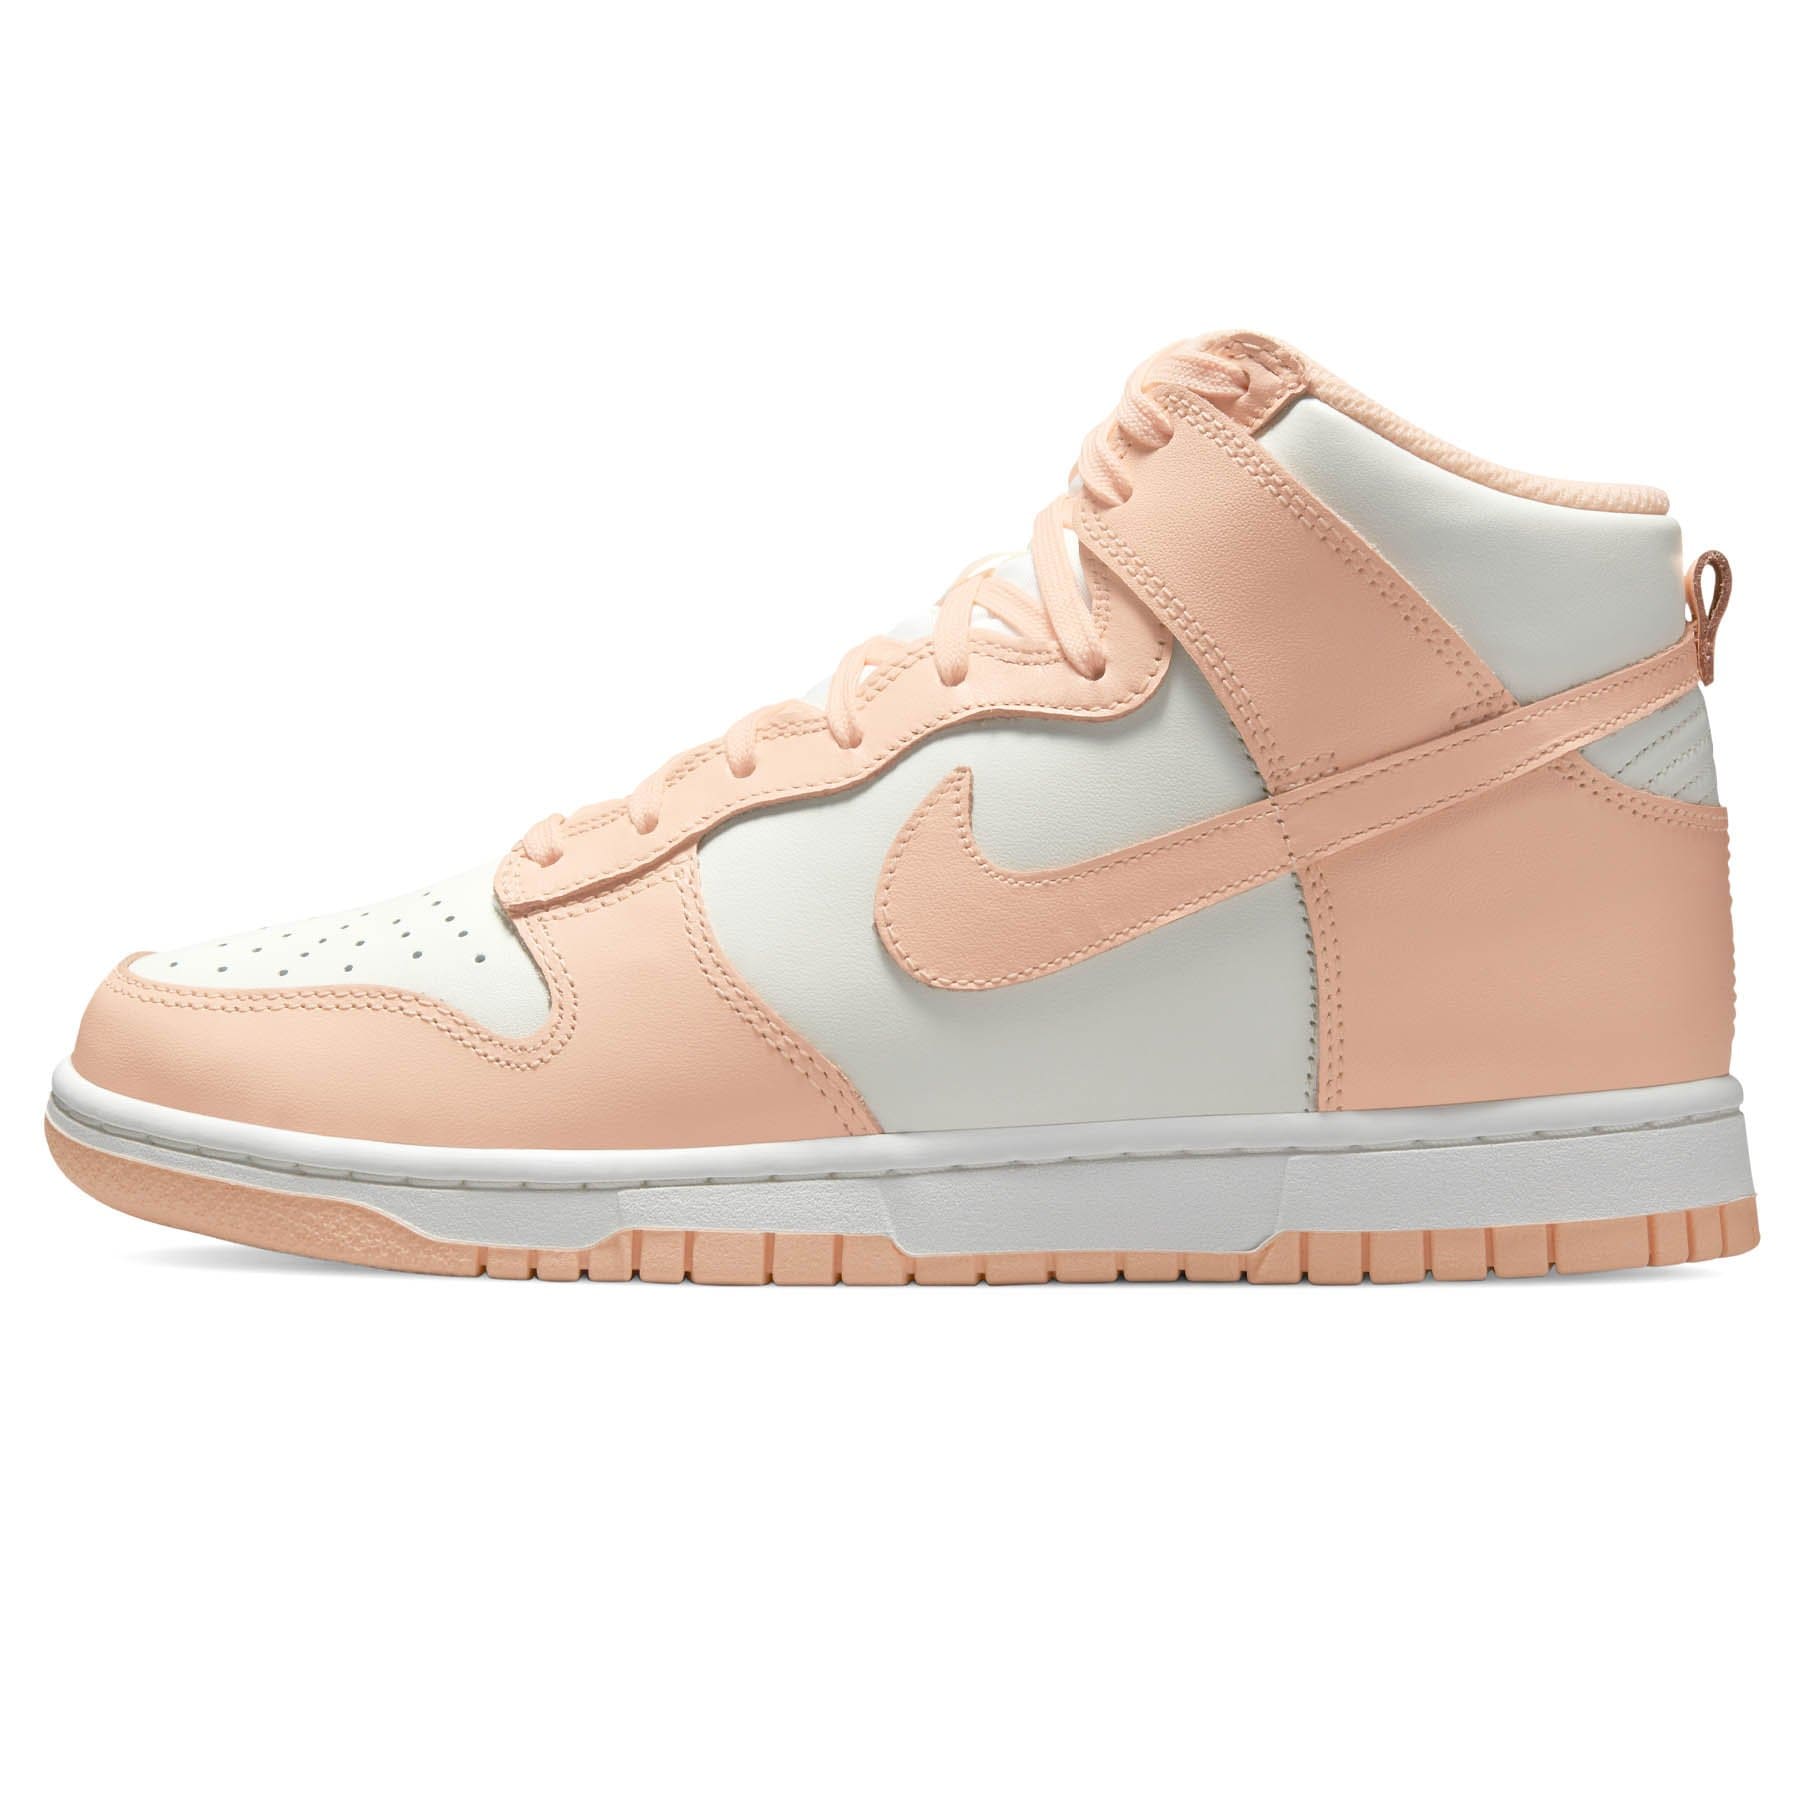 Double Boxed  209.99 Nike Dunk High Crimson Tint (W) Double Boxed